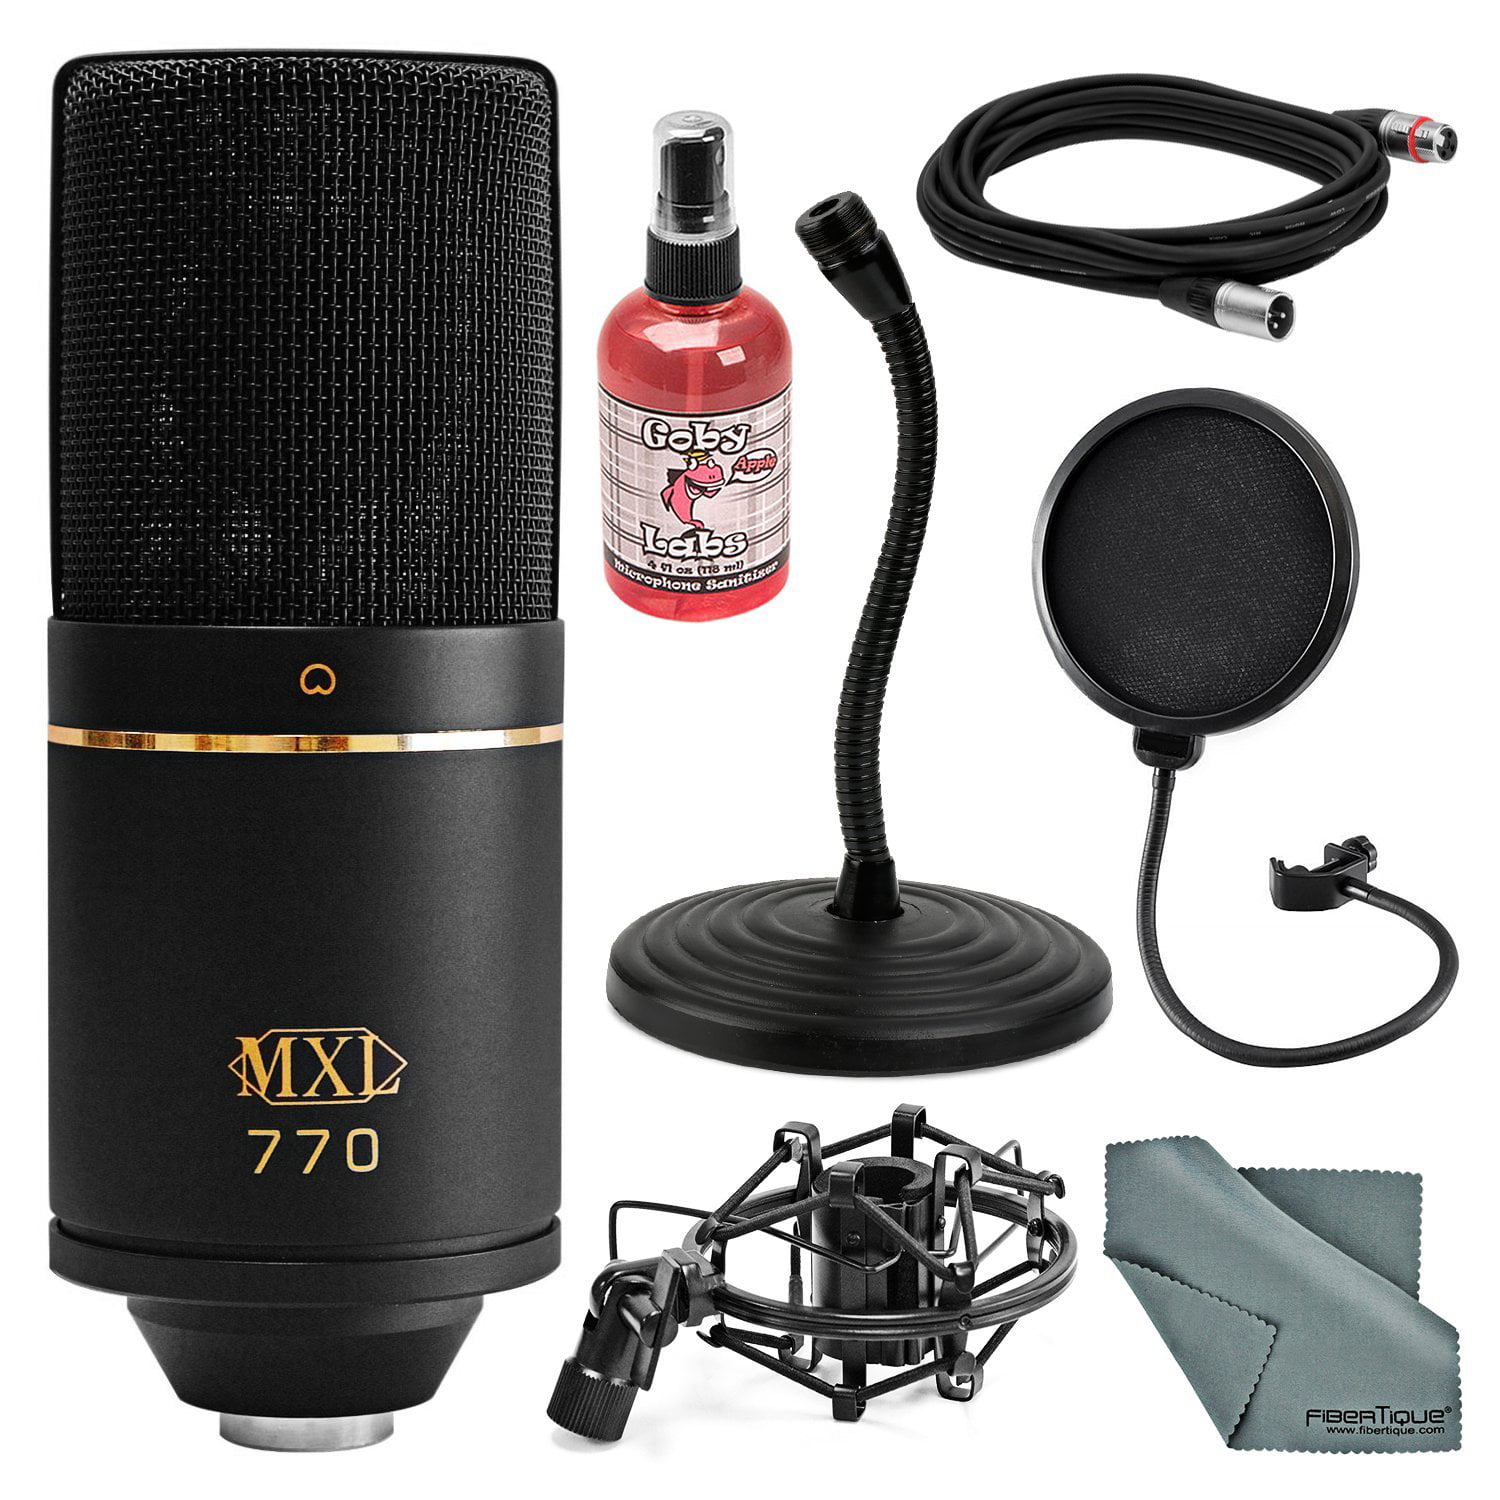 2 Pop Filters MXL-770 Condenser Mic and case + 2 XLR to XLR cables + 2 